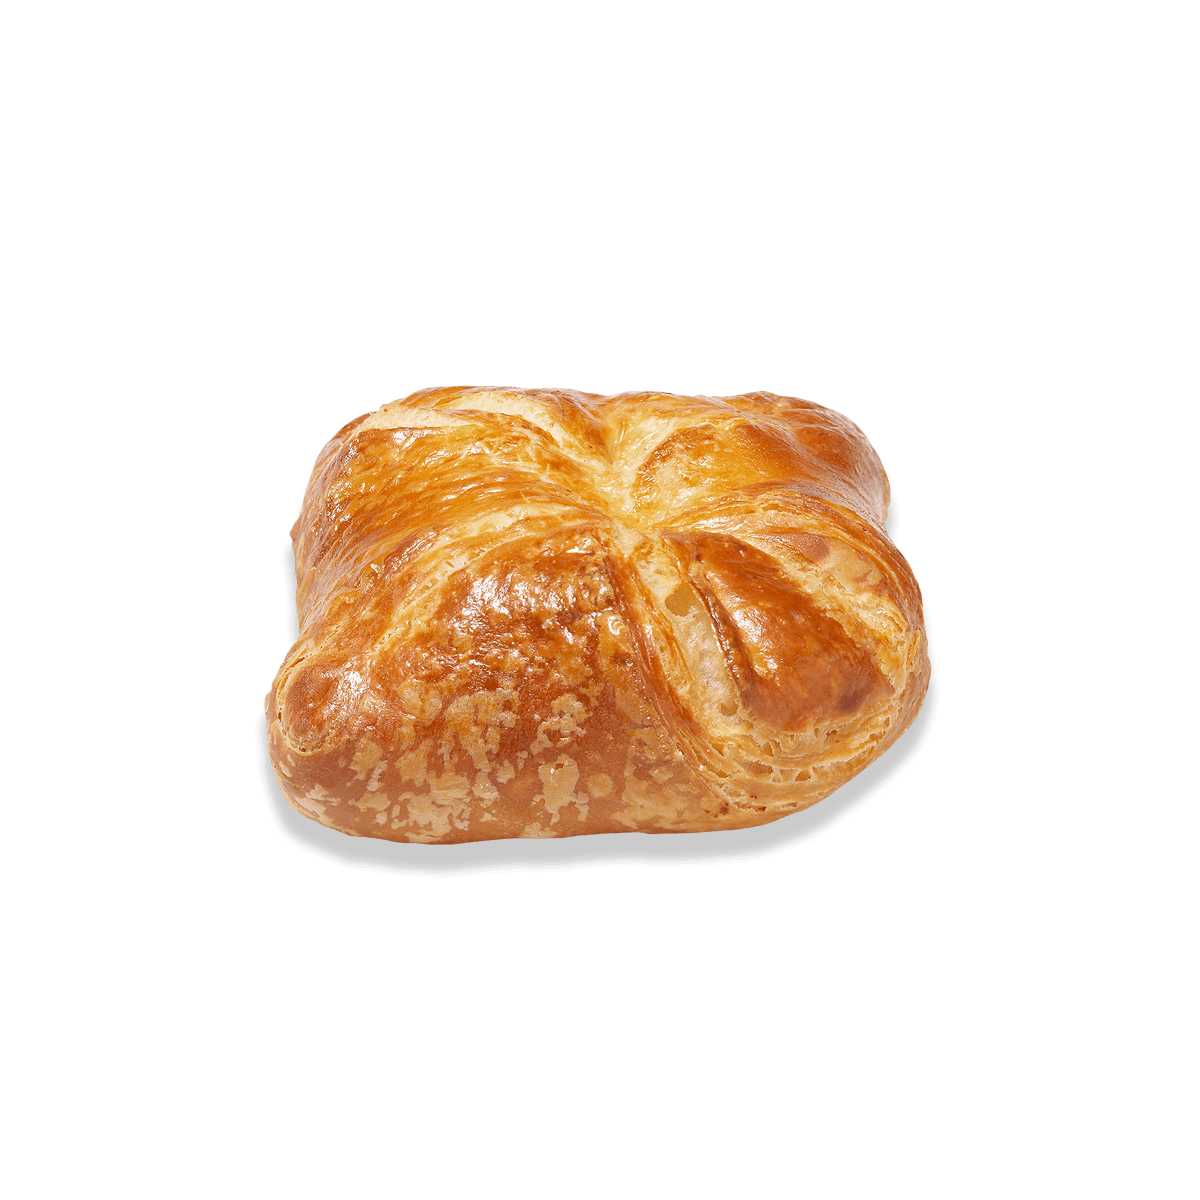 butter danish on the side